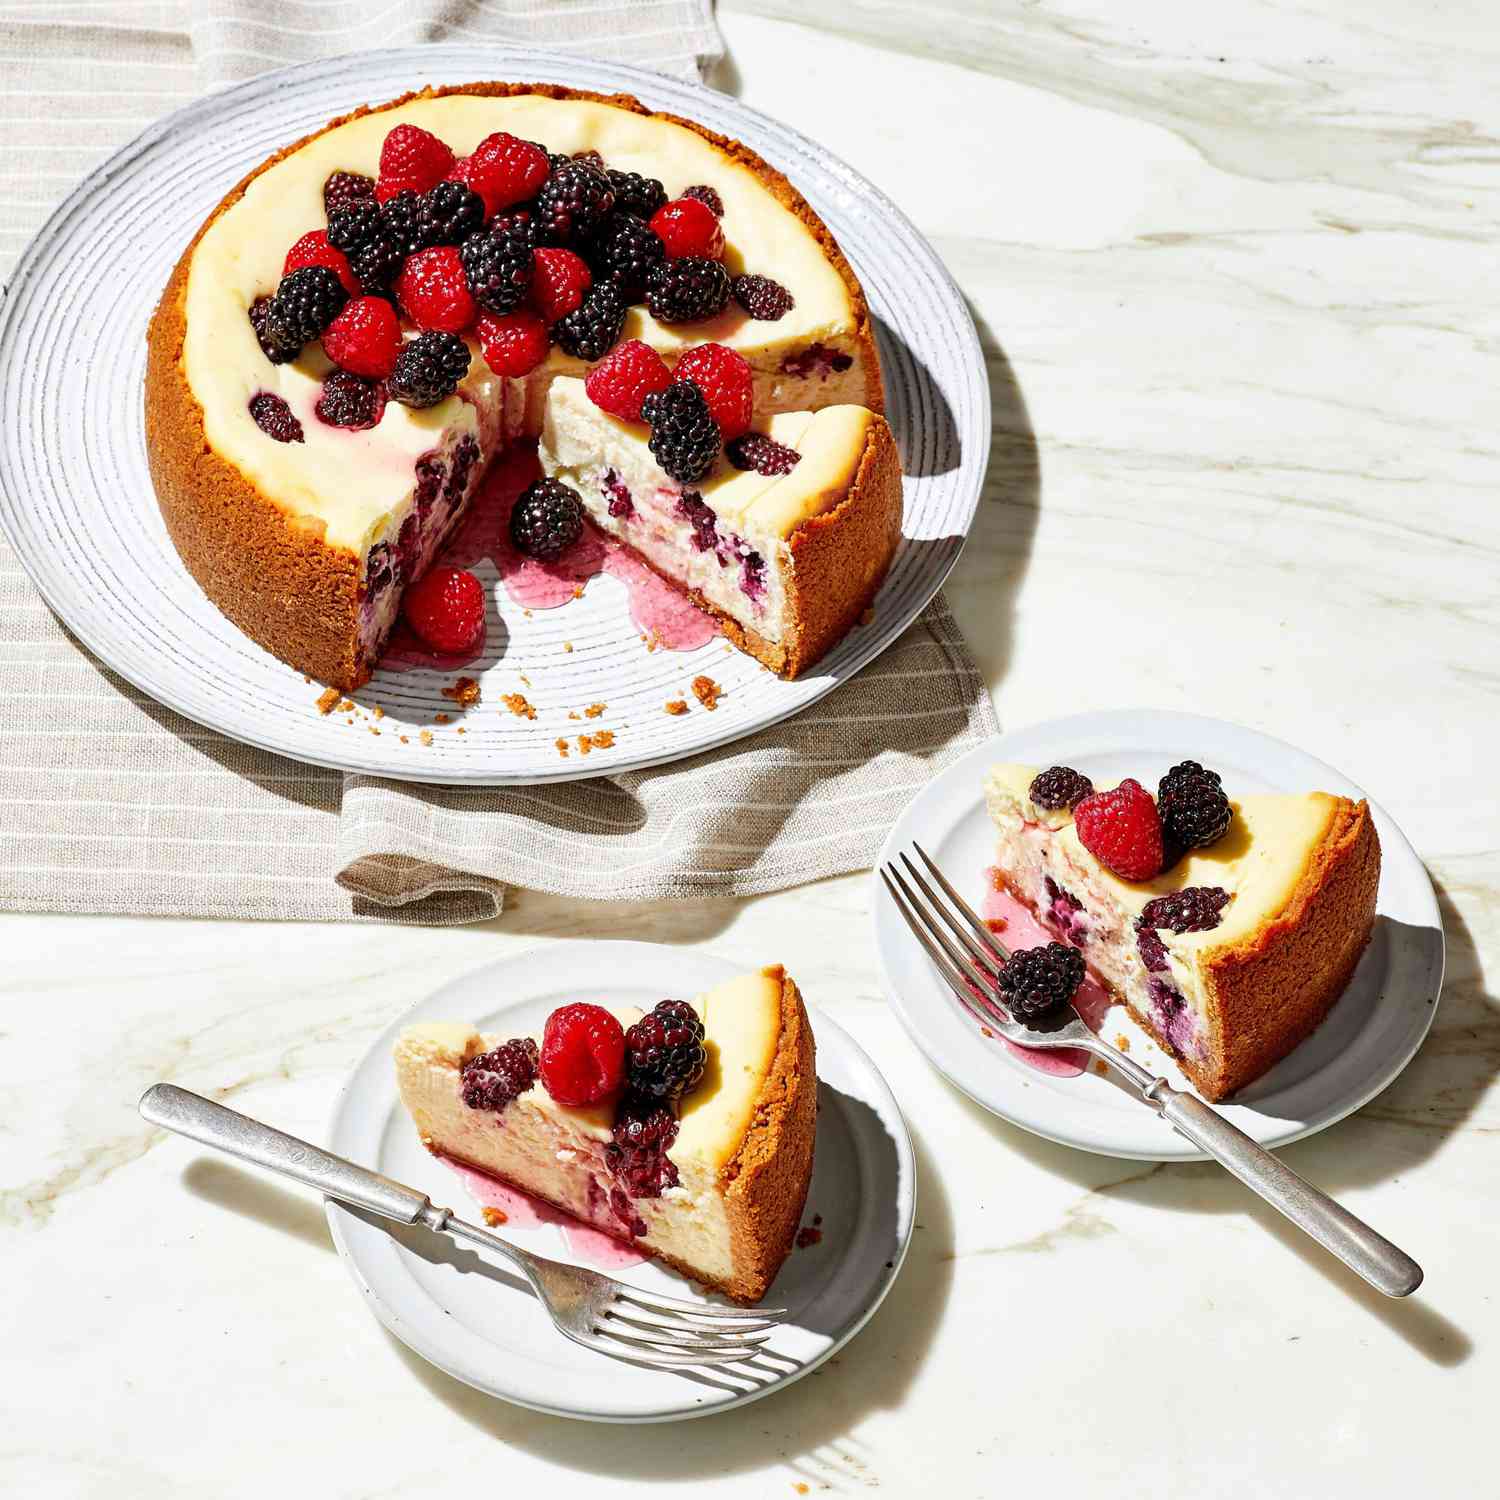 Crumb-crusted cheesecake topped with fresh berries